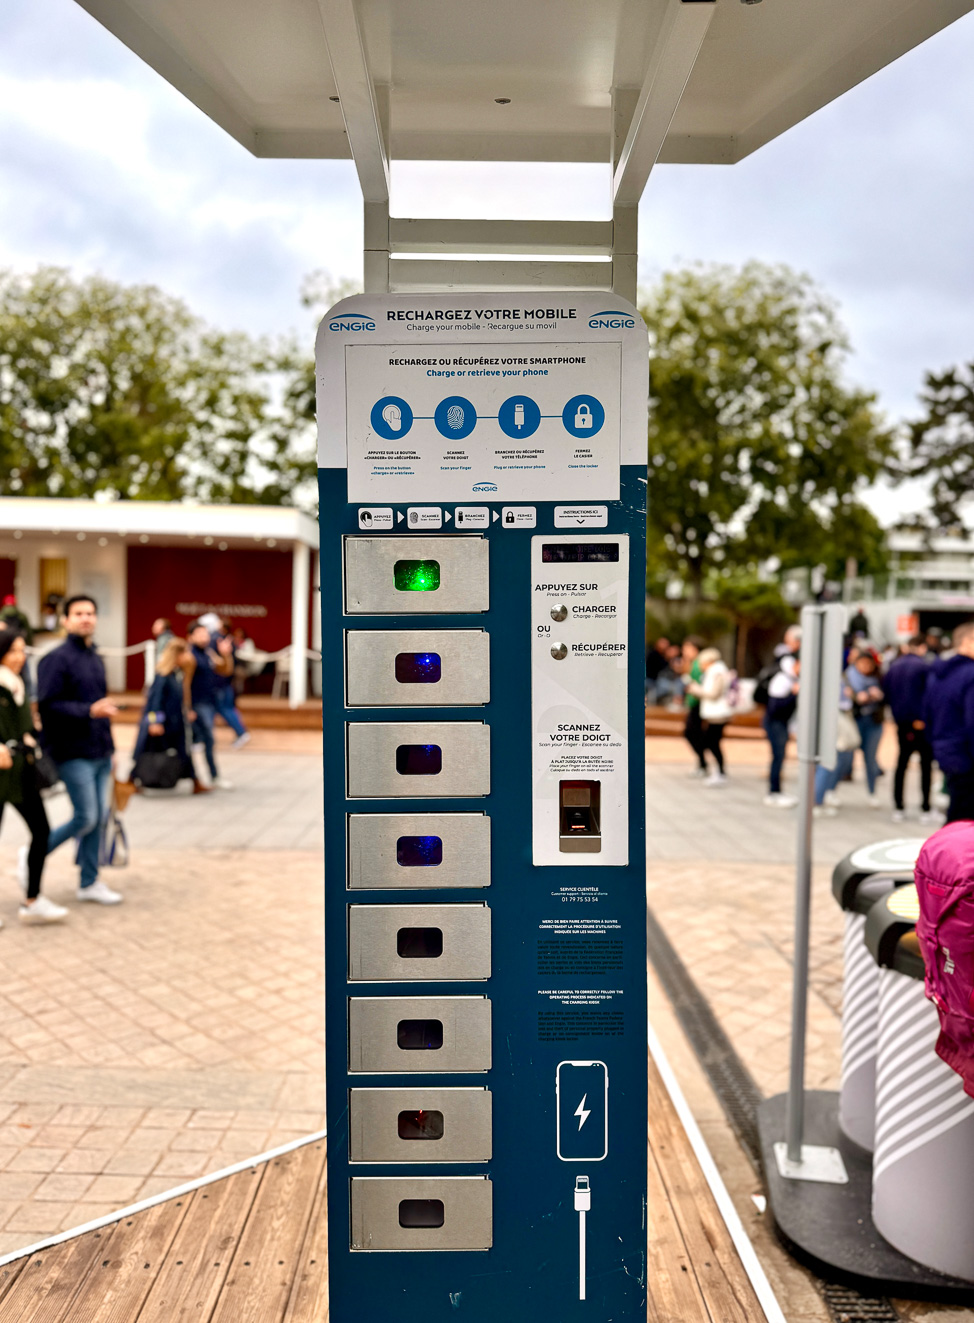 Charging lockers at Roland-Garros, the French Open